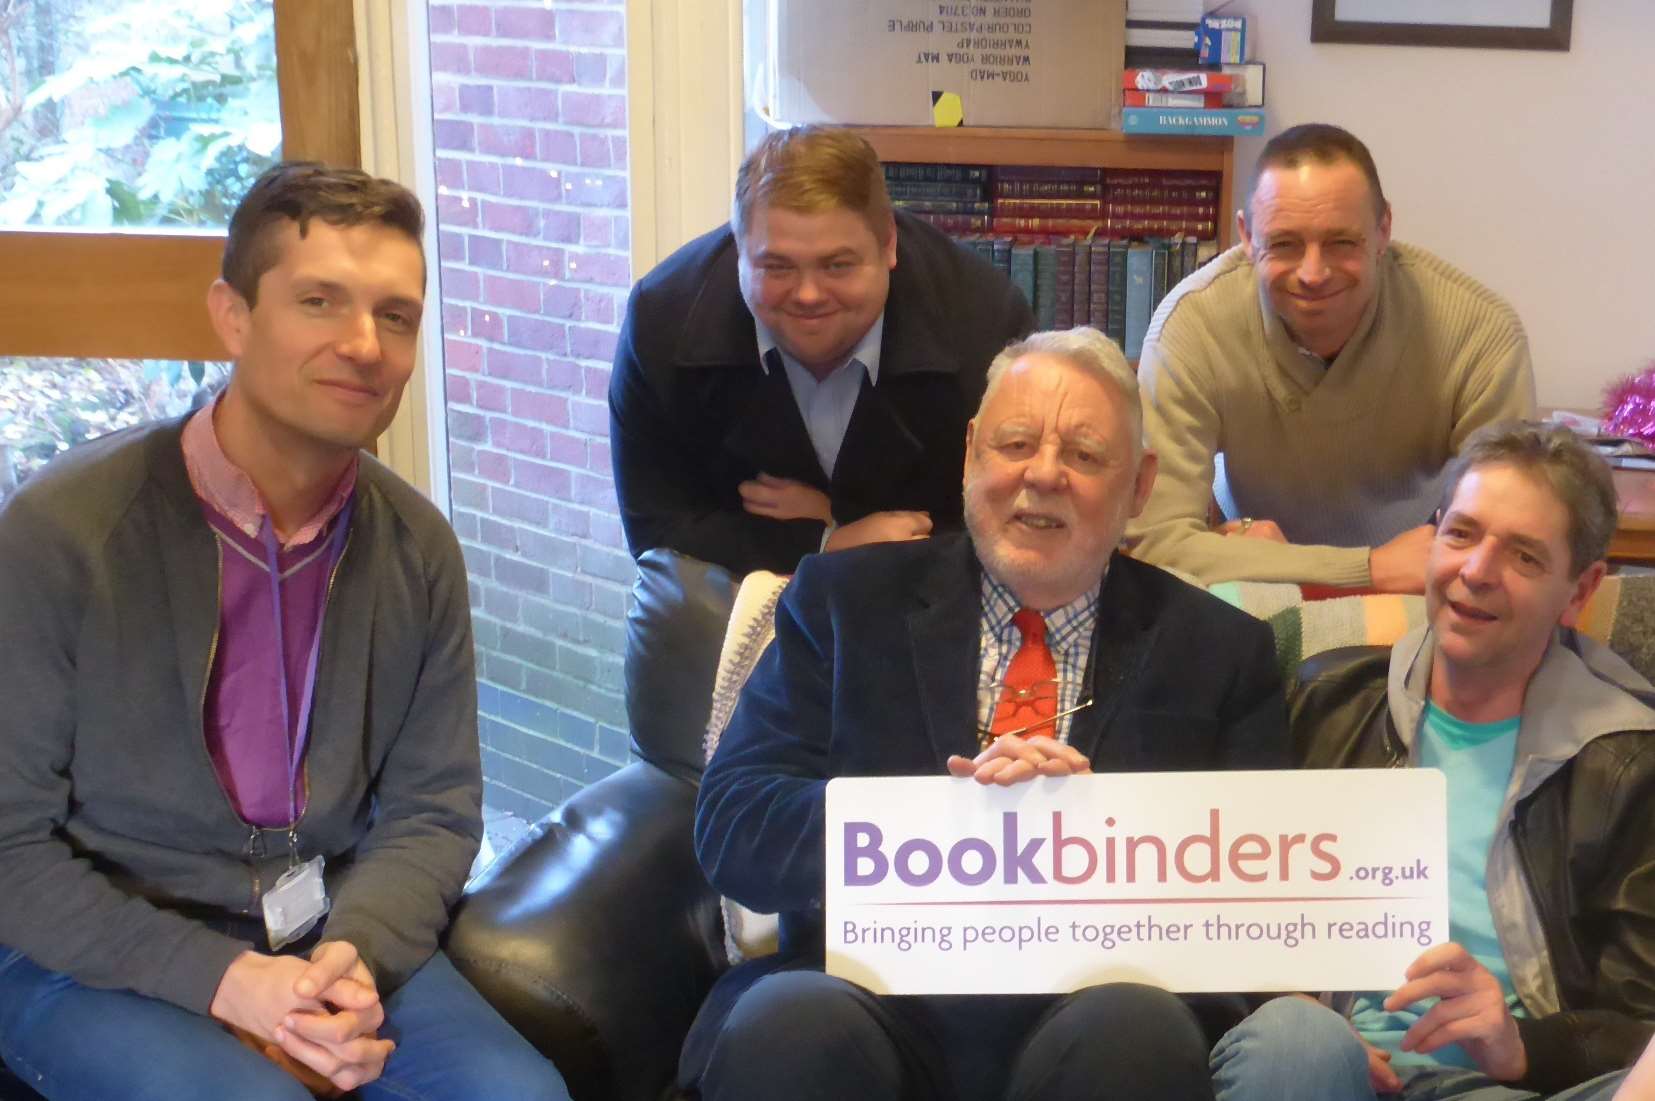 Terry Waite meets staff and clients of Porchlight to talk about Bookbinders, a KM Charity Team initiative to boost reading levels of vulnerable groups.